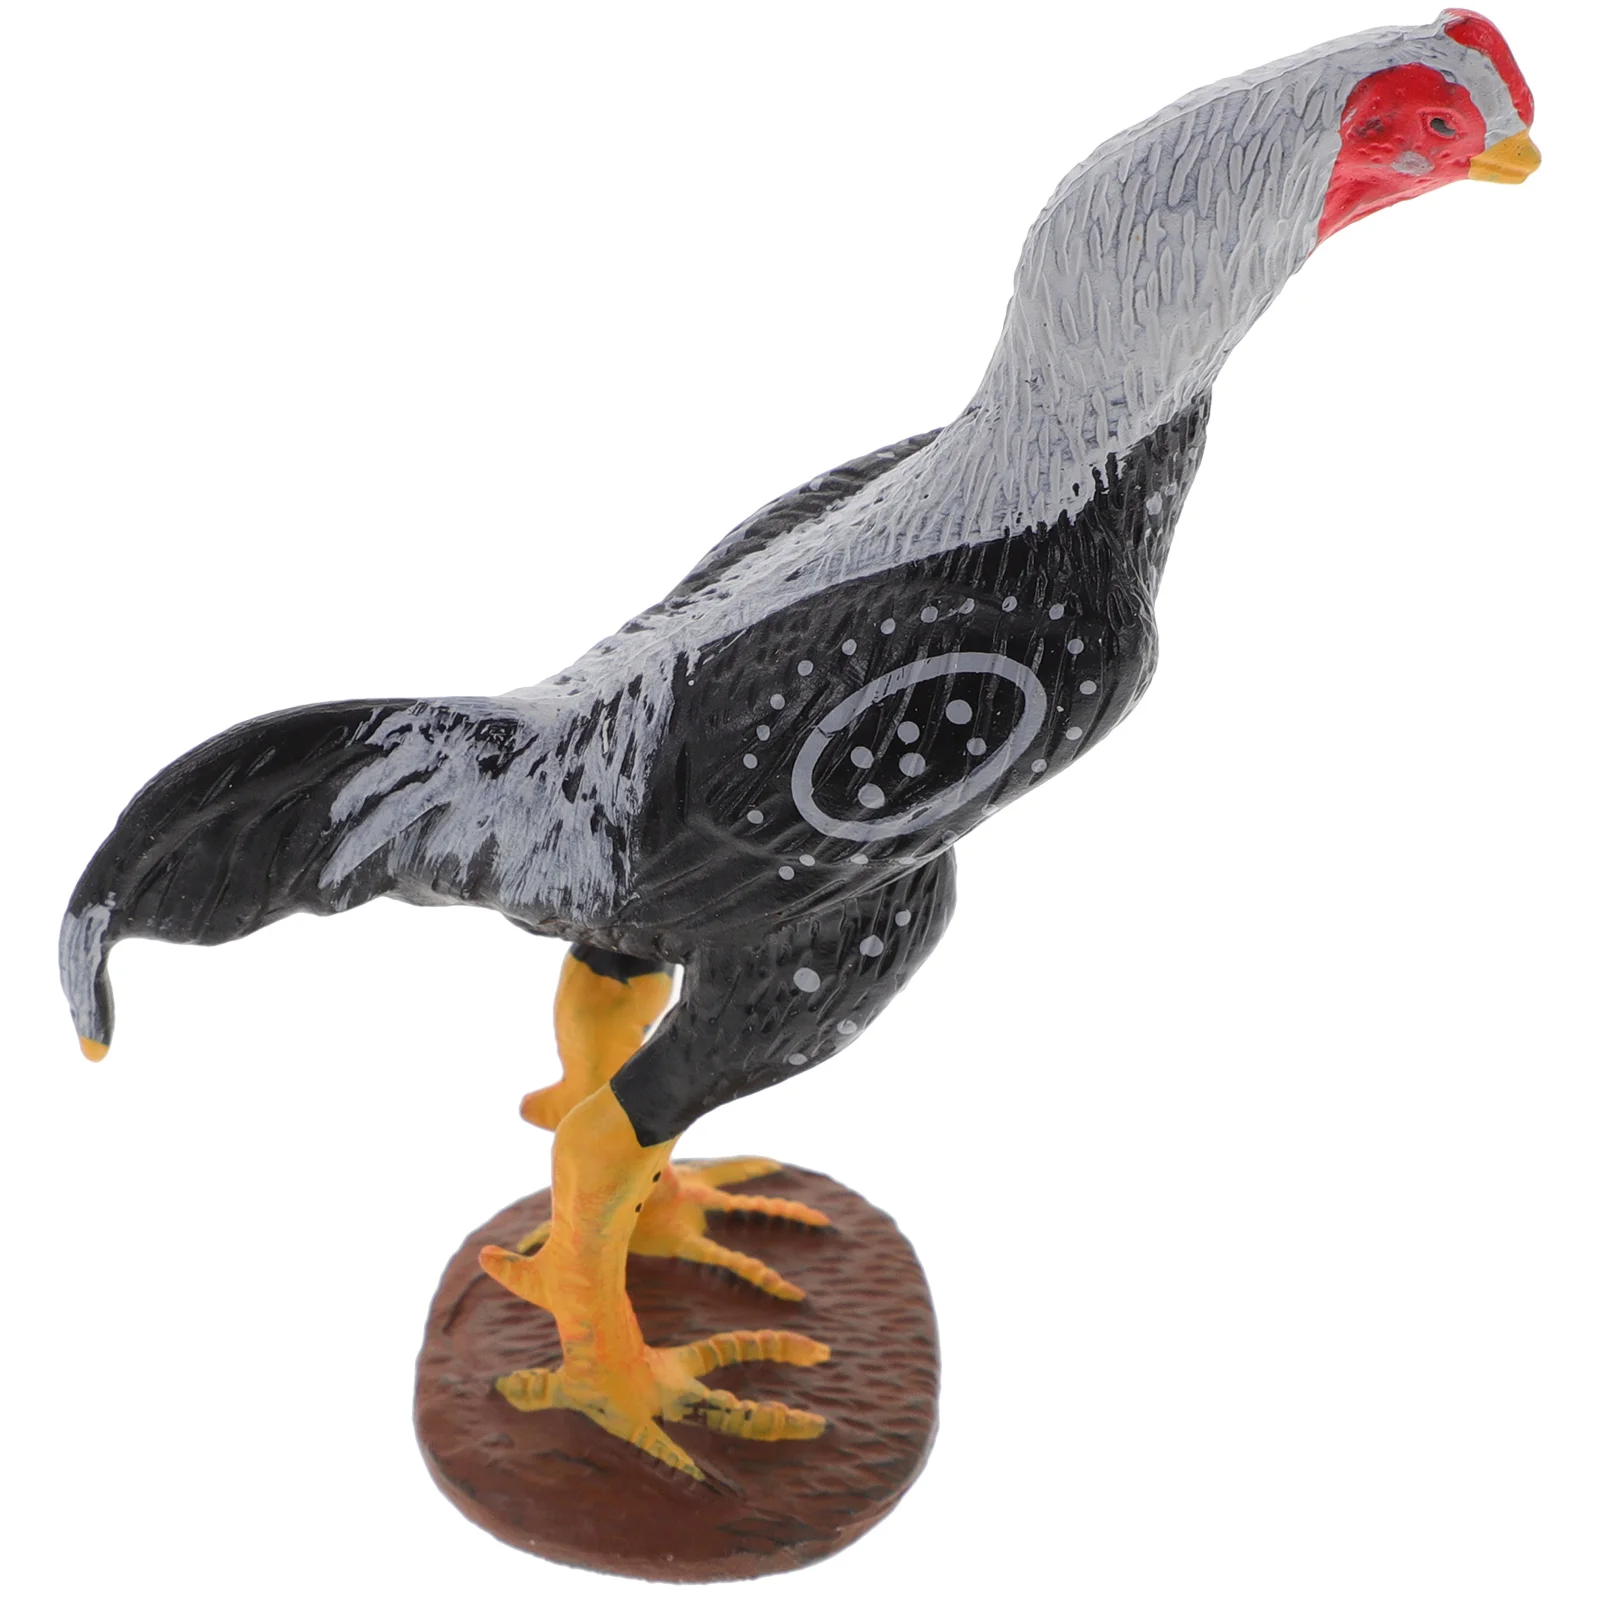 

Simulation Cockfighting Model Realistic Kids Plaything Gamecock Toy Supplies Educational Toys Accessories Plastic Children Mini